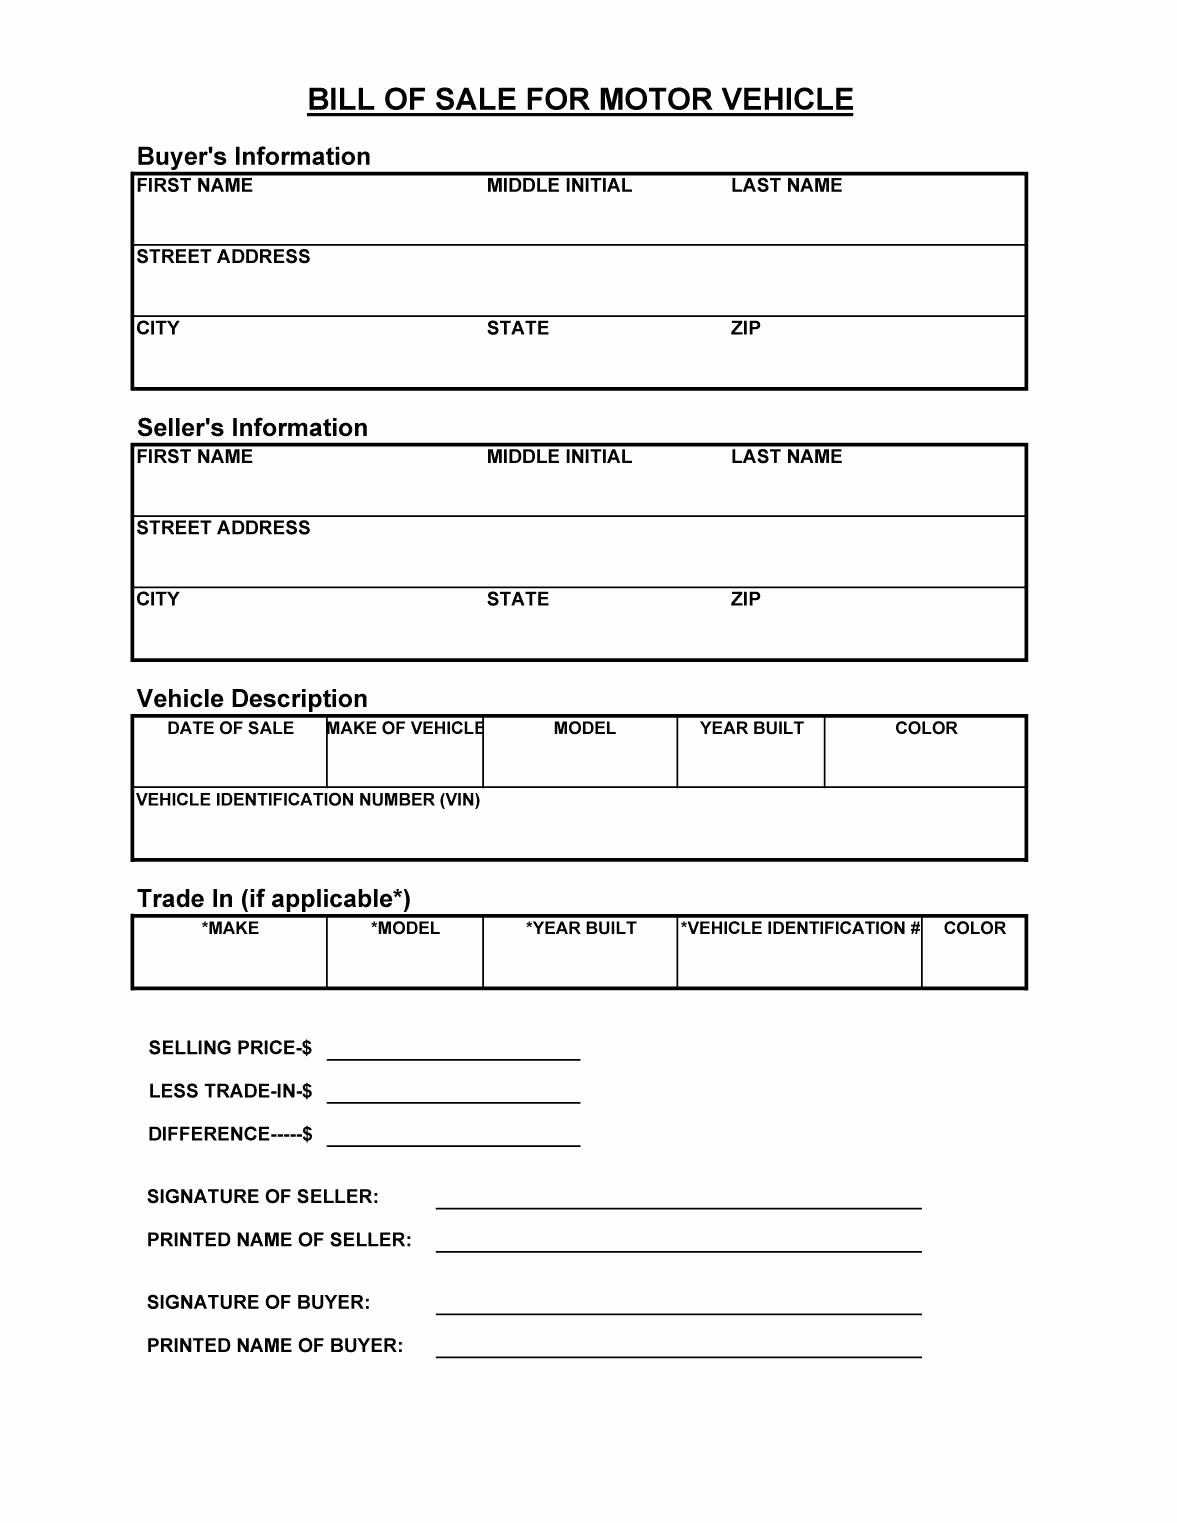 Bill Of Sale form Template Lovely 45 Fee Printable Bill Of Sale Templates Car Boat Gun